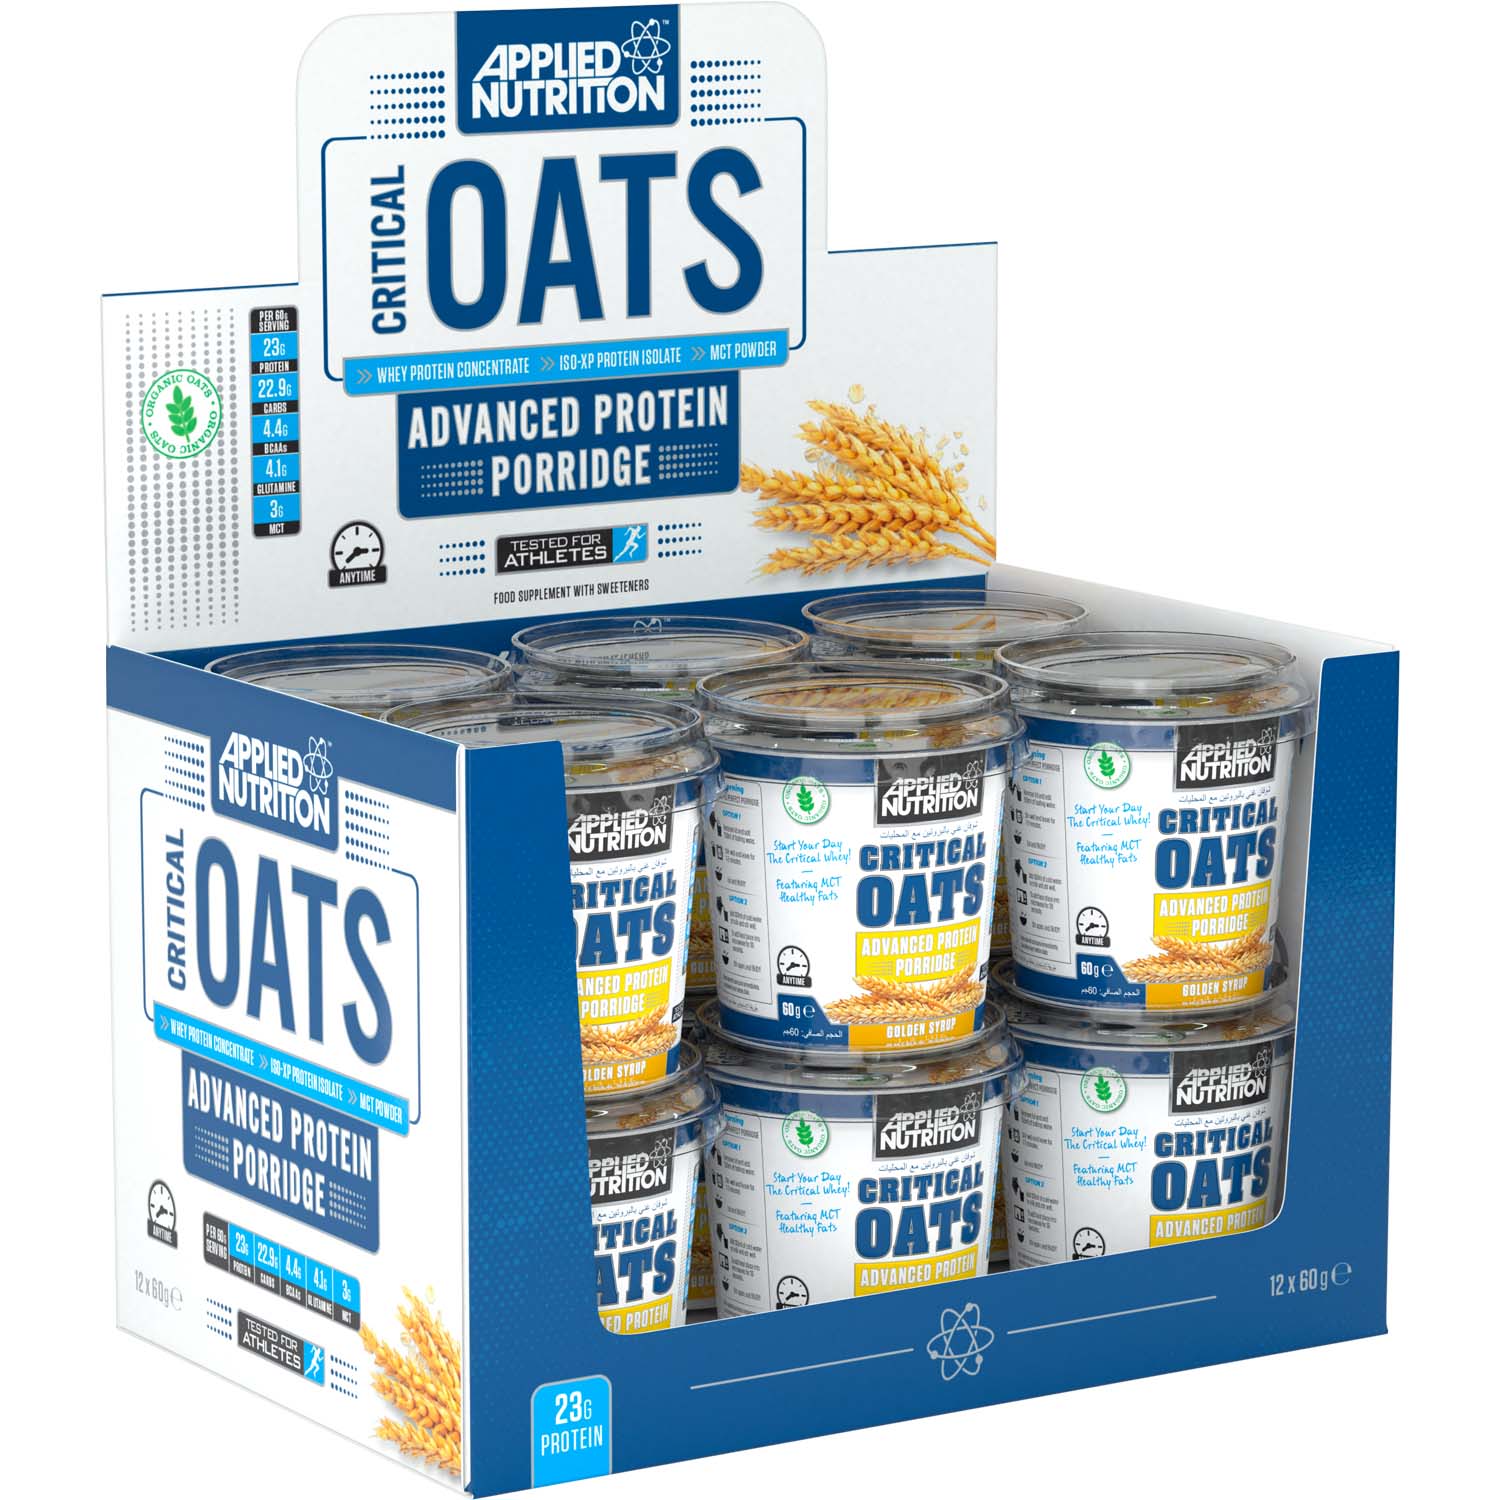 Applied Nutrition Critical Oats Box of 12 Pieces Golden Syrup